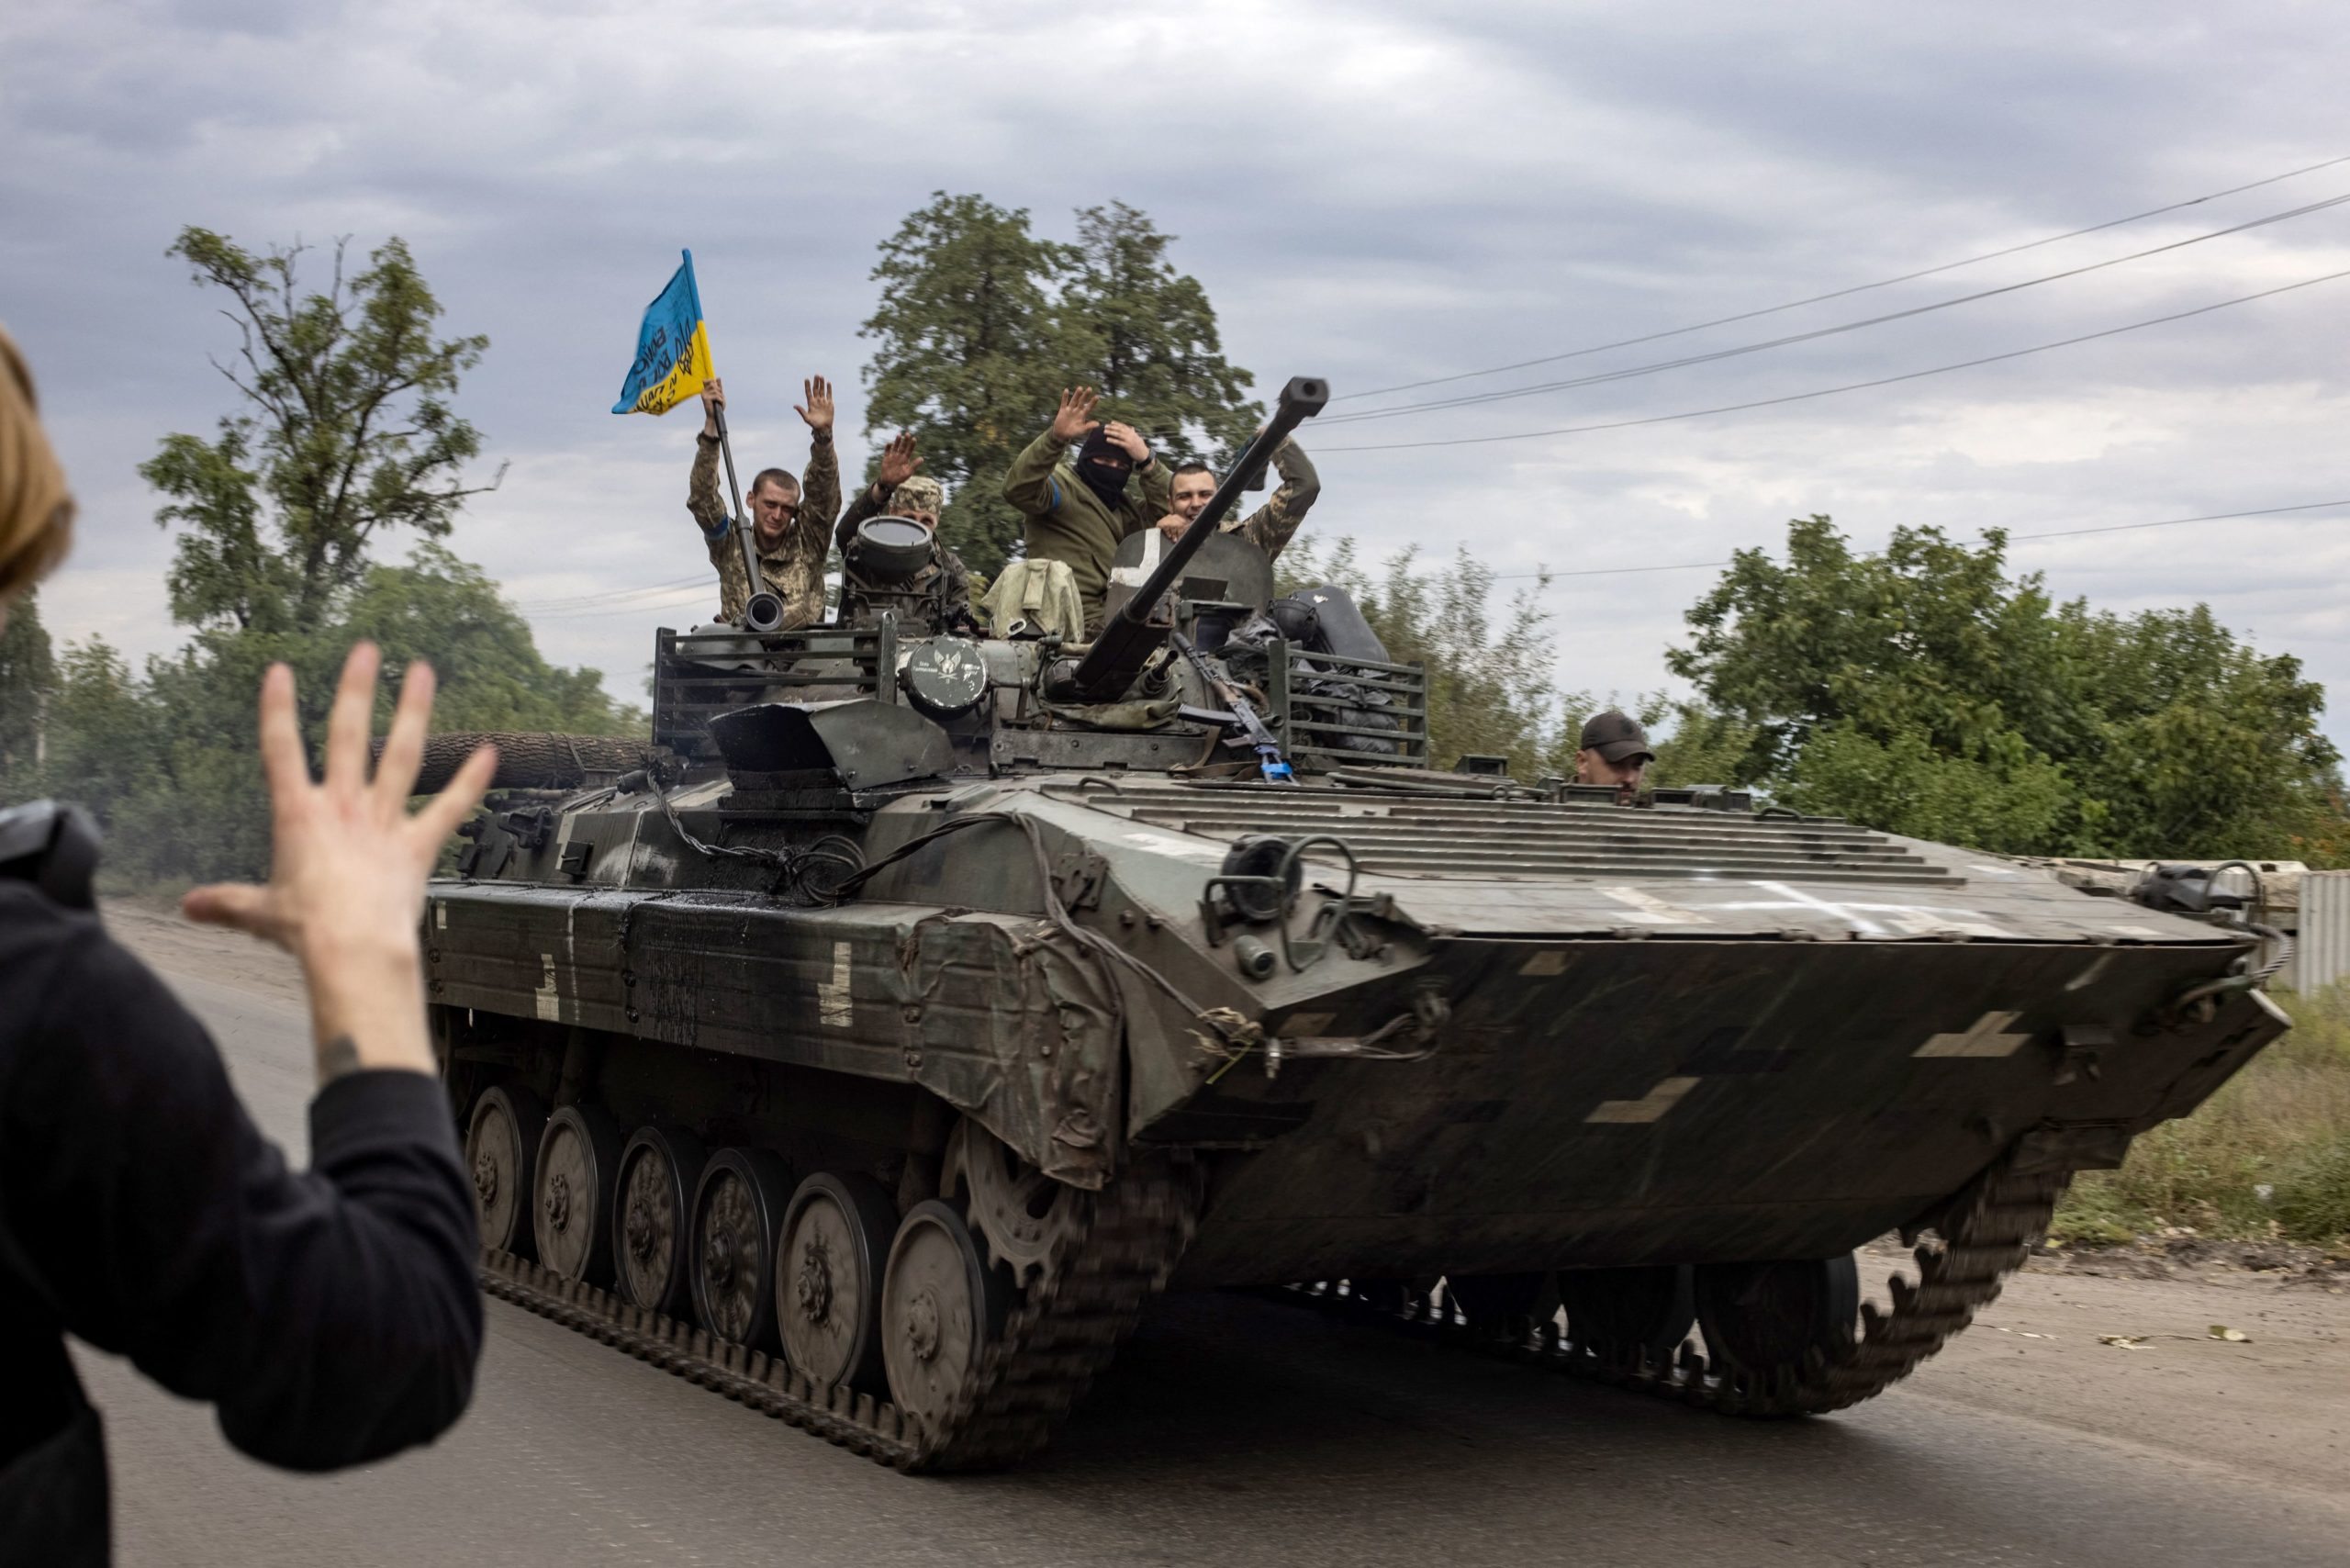 TOPSHOT &#8211; In this photograph taken on September 20, 2022 a local resident greets Ukrainian soldiers riding an armoured personnel carrier in Mala Komyshuvakha, near Izyum, Kharkiv region. (Photo by Yevhen TITOV / AFP) (Photo by YEVHEN TITOV/AFP via Getty Images)